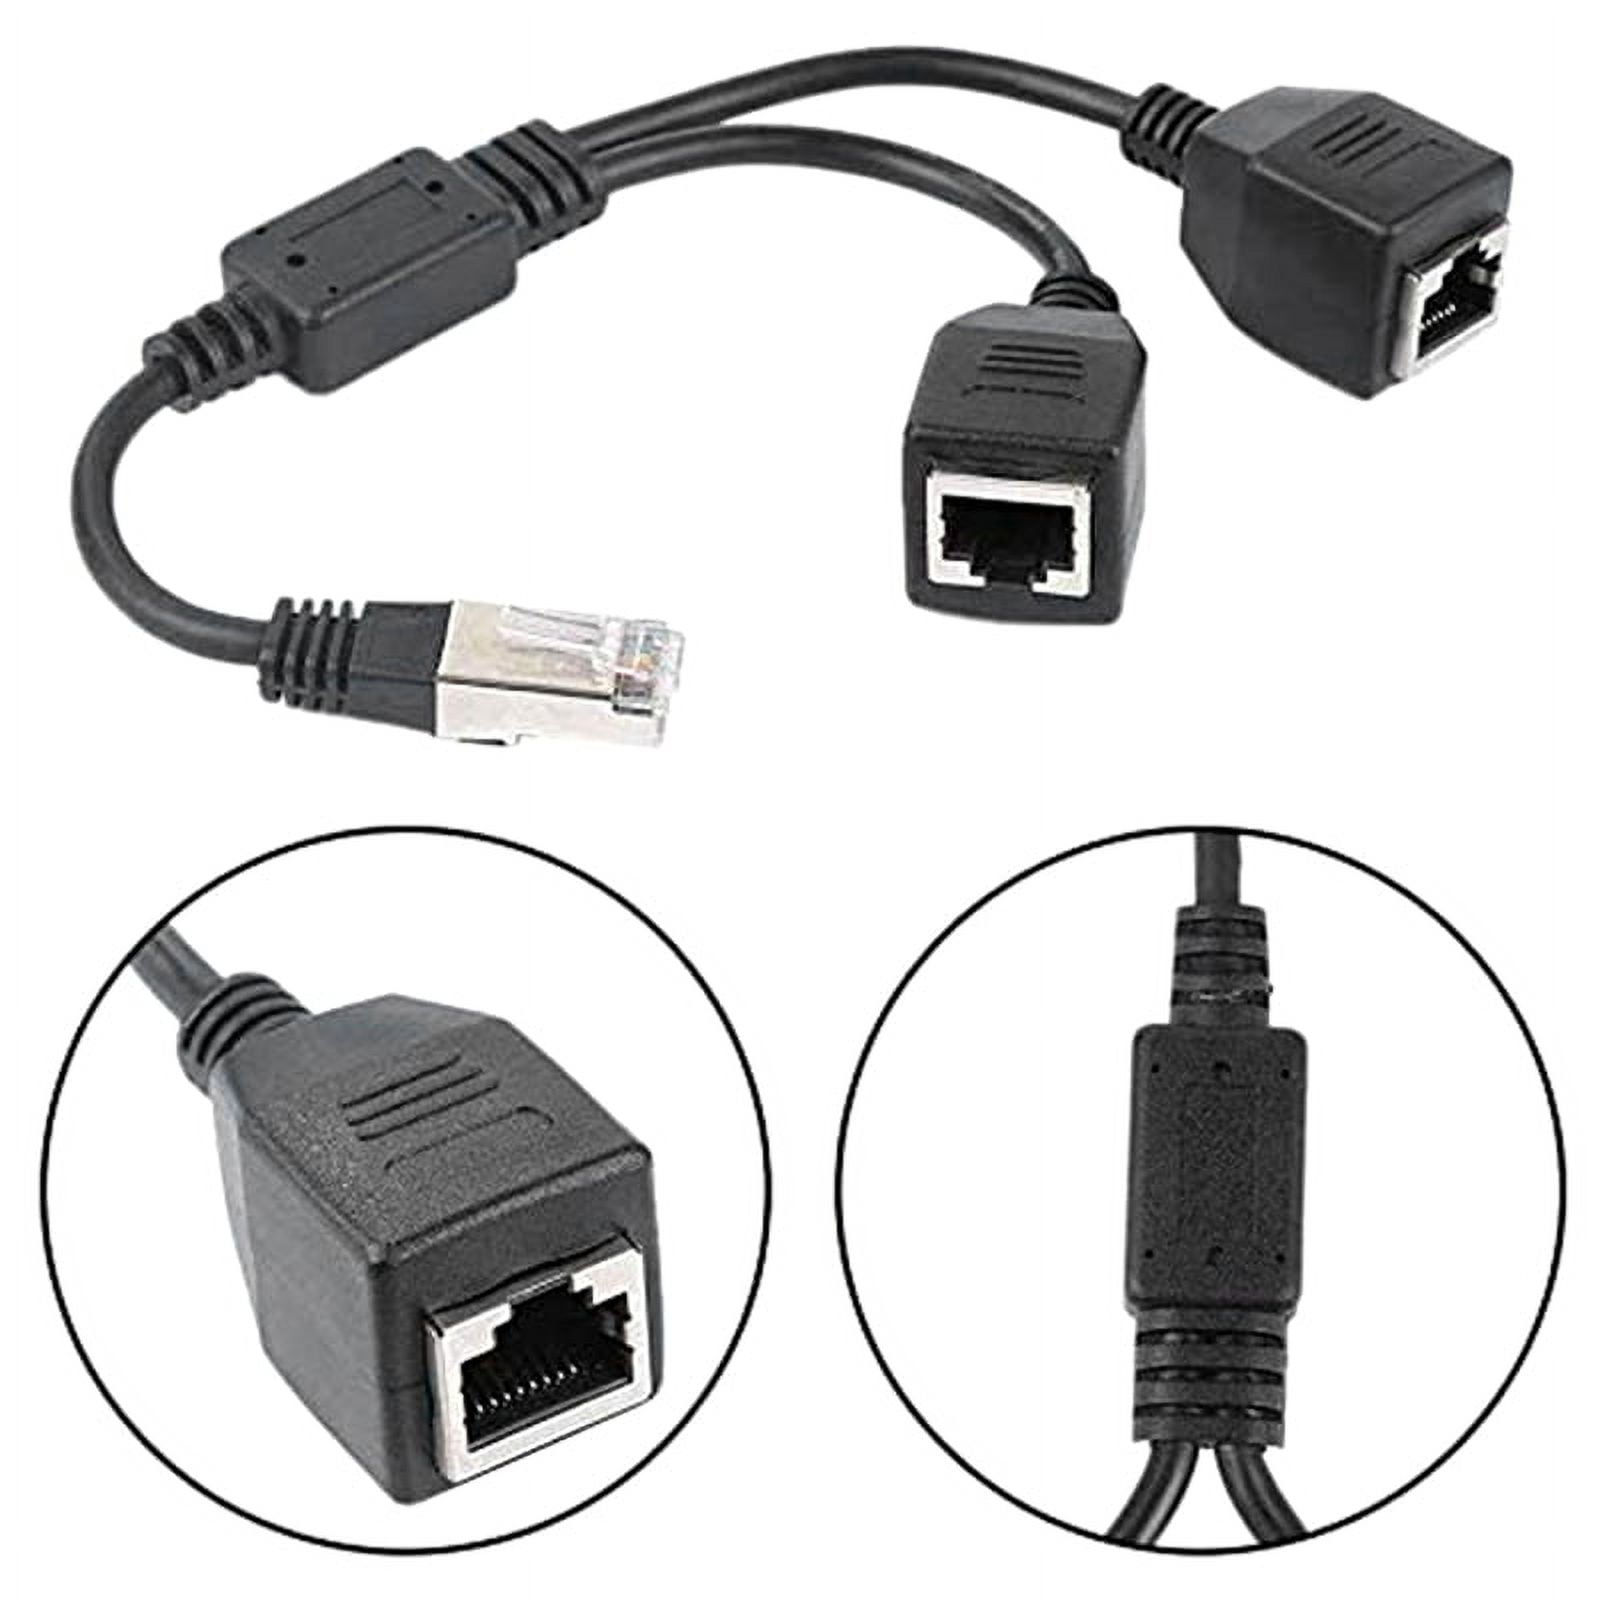 RJ45 Ethernet Splitter Cable, TSV 1 to 2 LAN Male to Female Network Adapter  Fit for Cat5, Cat5e, Cat6, Cat7 Ethernet Socket Connector